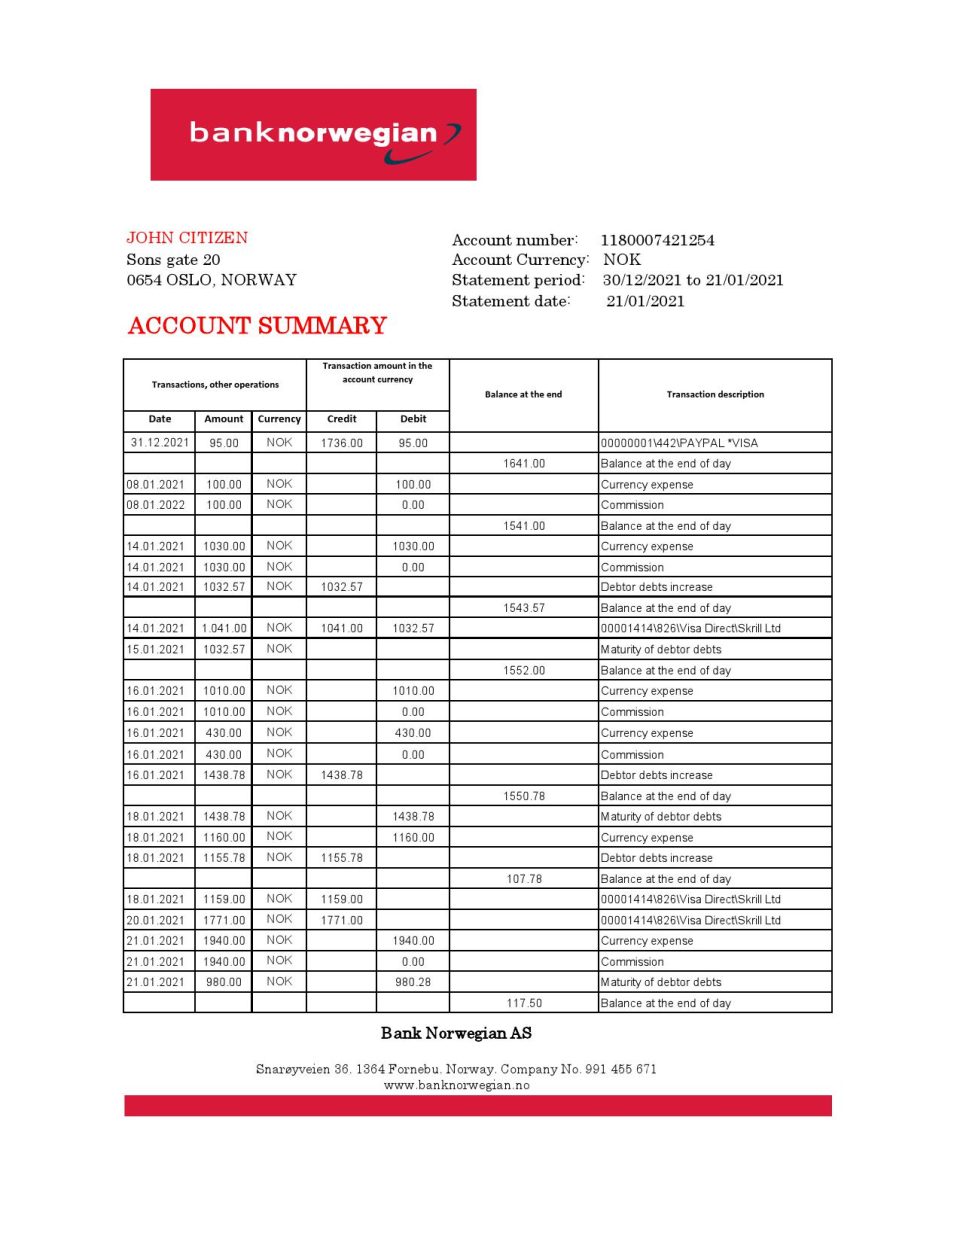 Norway Bank Norwegian AS bank statement easy to fill template in .xls and .pdf file format